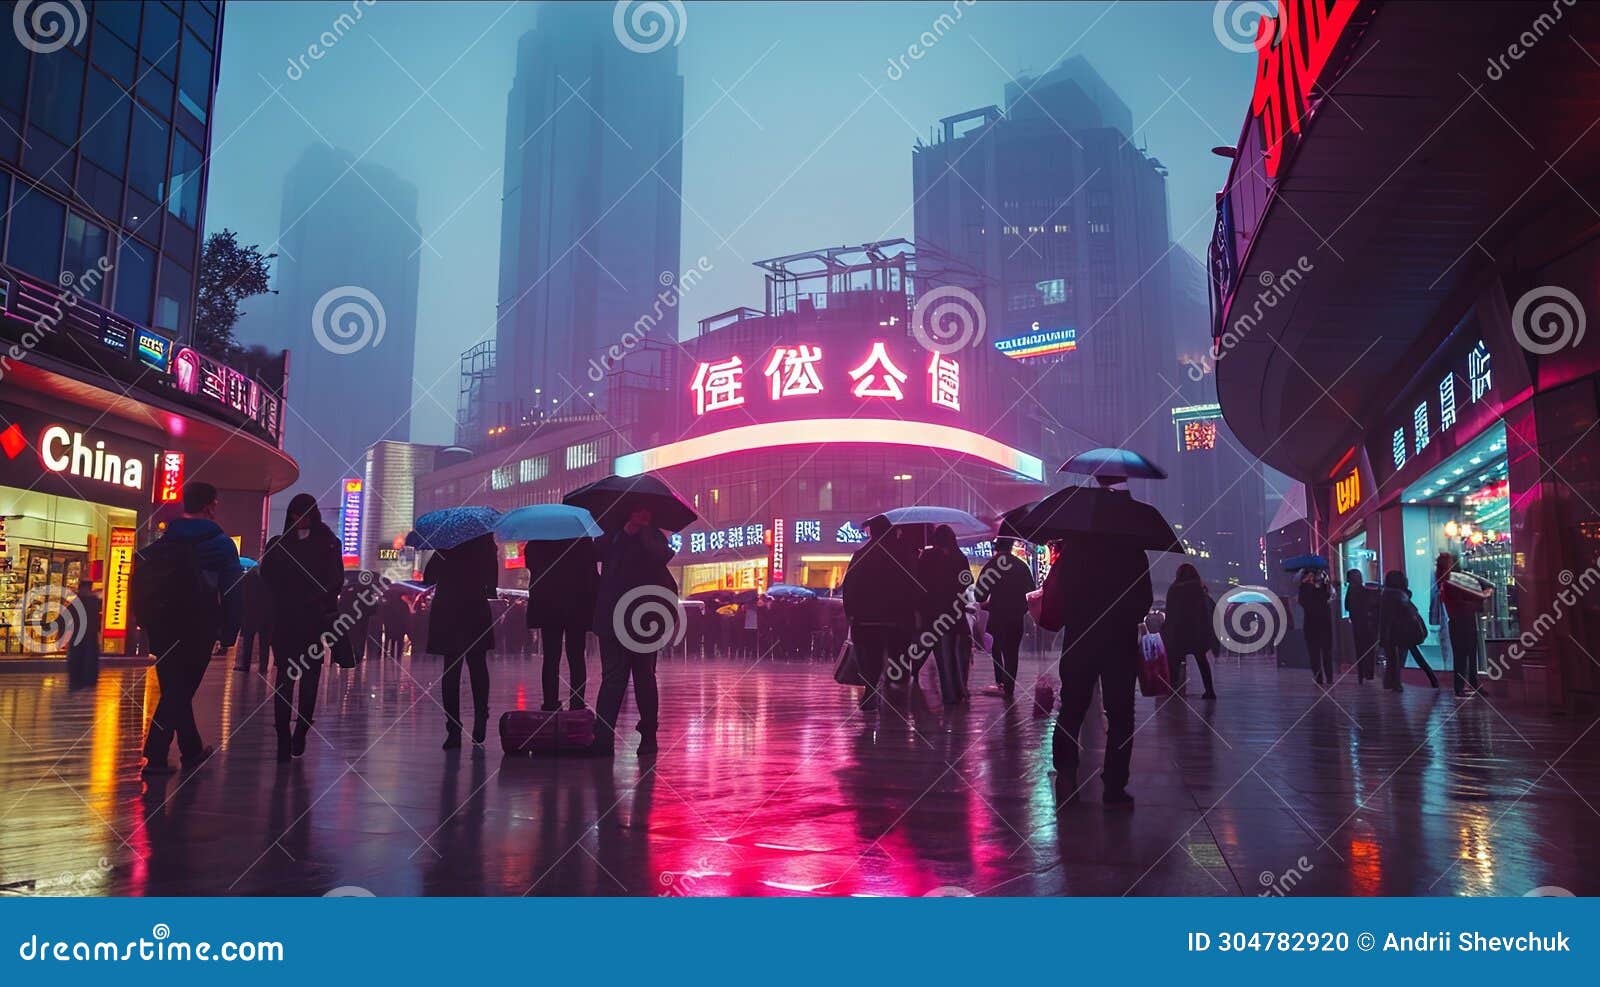 unidentified people walking in shanghai china. shanghai is the capital and most populous city of china